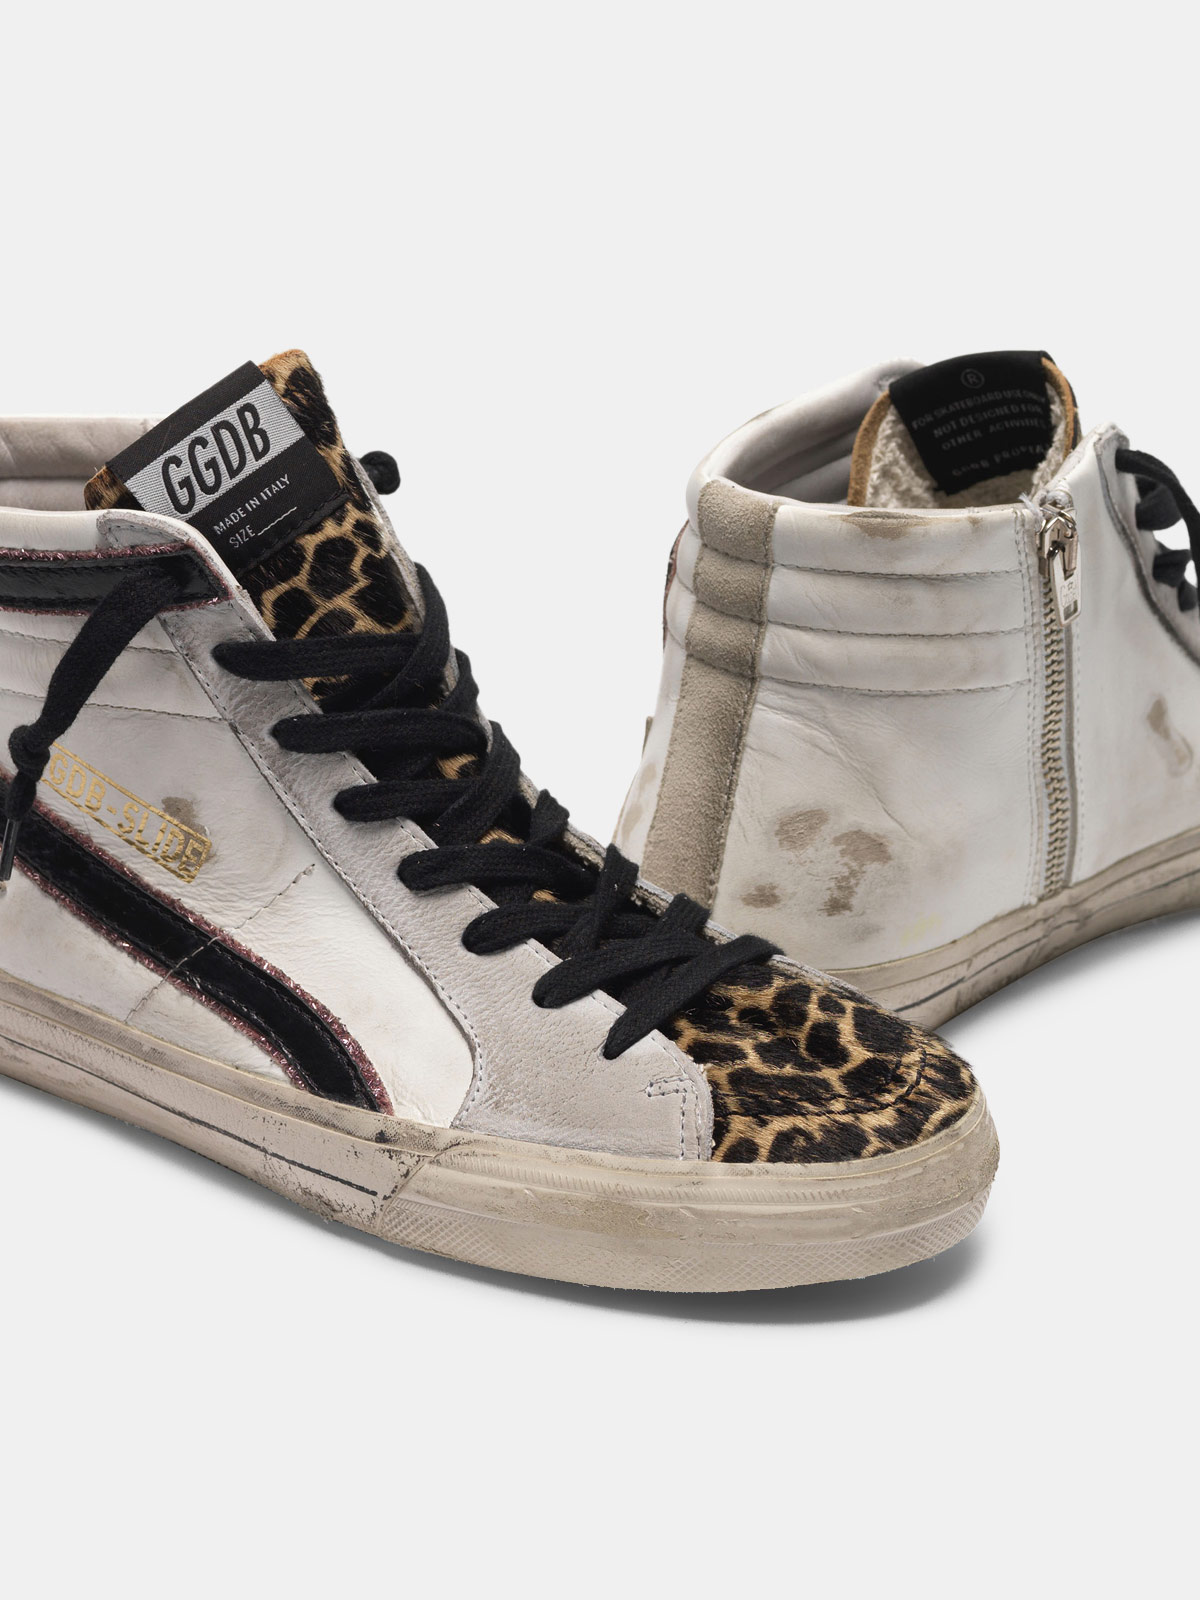 Slide sneakers with leopard-print pony skin insert and glitter detail ...